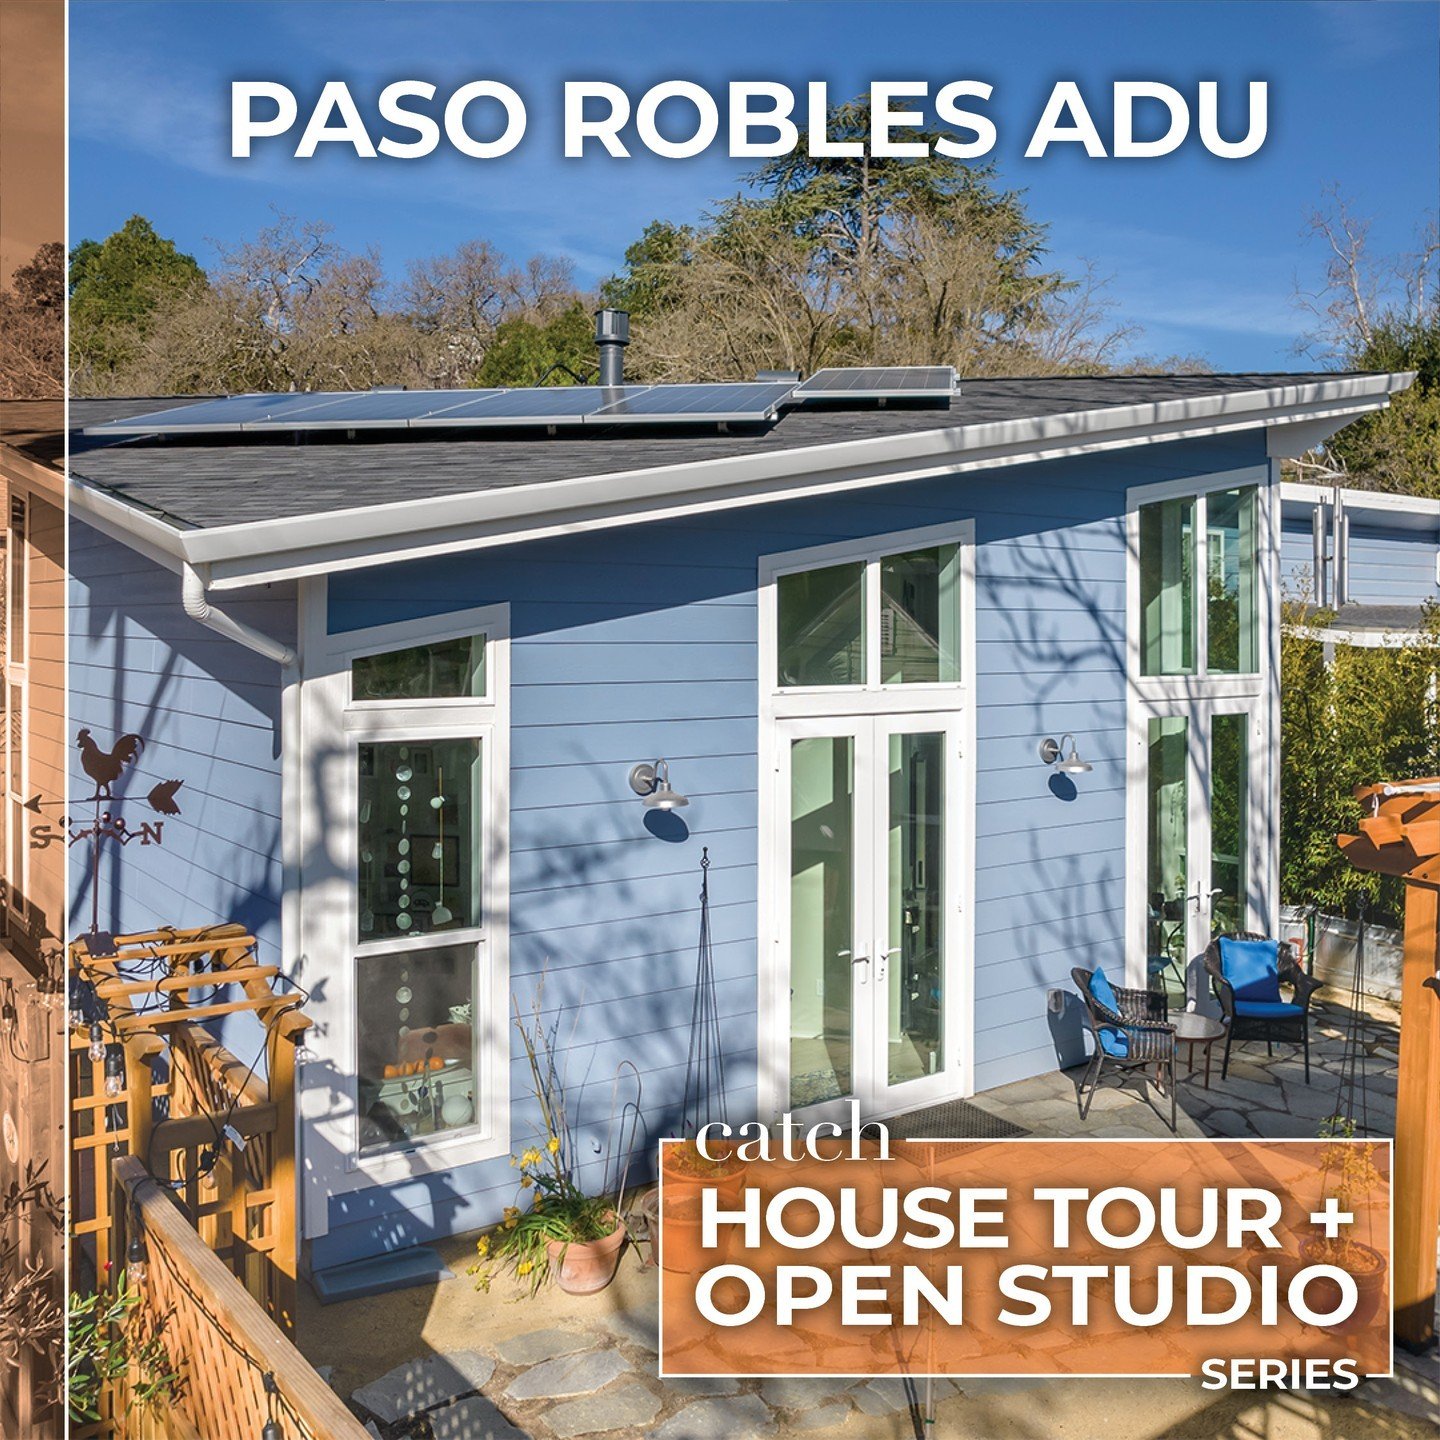 It's not too late to join us this evening (Wednesday, May 8th at 5:30 PM) for a tour of the Paso Robles ADU. A one-of-a-kind ADU design with a mezzanine level and an overall ceiling height of 16 ft! Message Natalie at natalie@catcharchitecture.com to